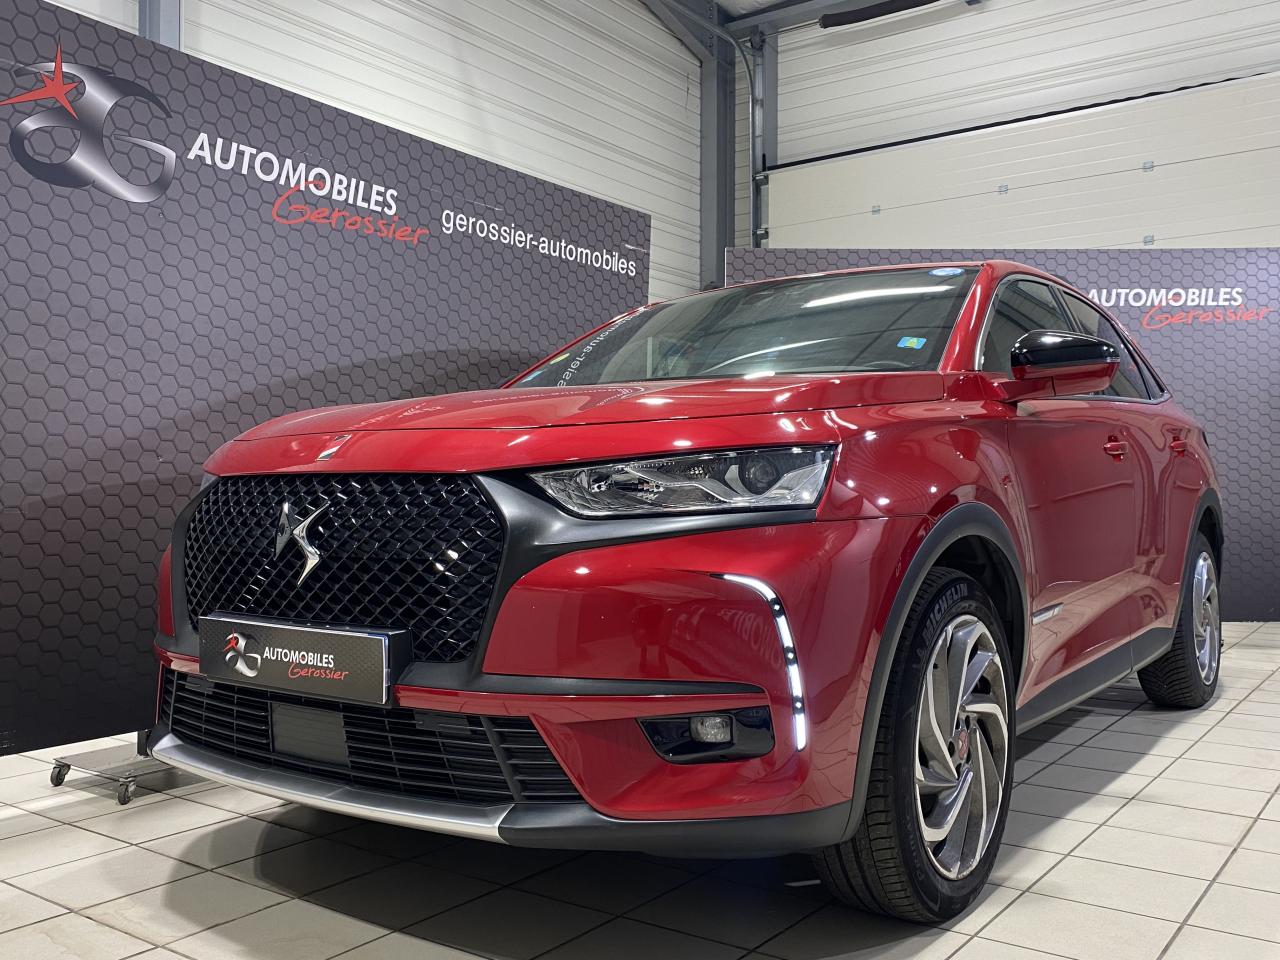 DS-DS7 CROSSBACK-DS7 Crossback 1.5 BlueHDi - 130 Drive Efficiency  Performance Line 